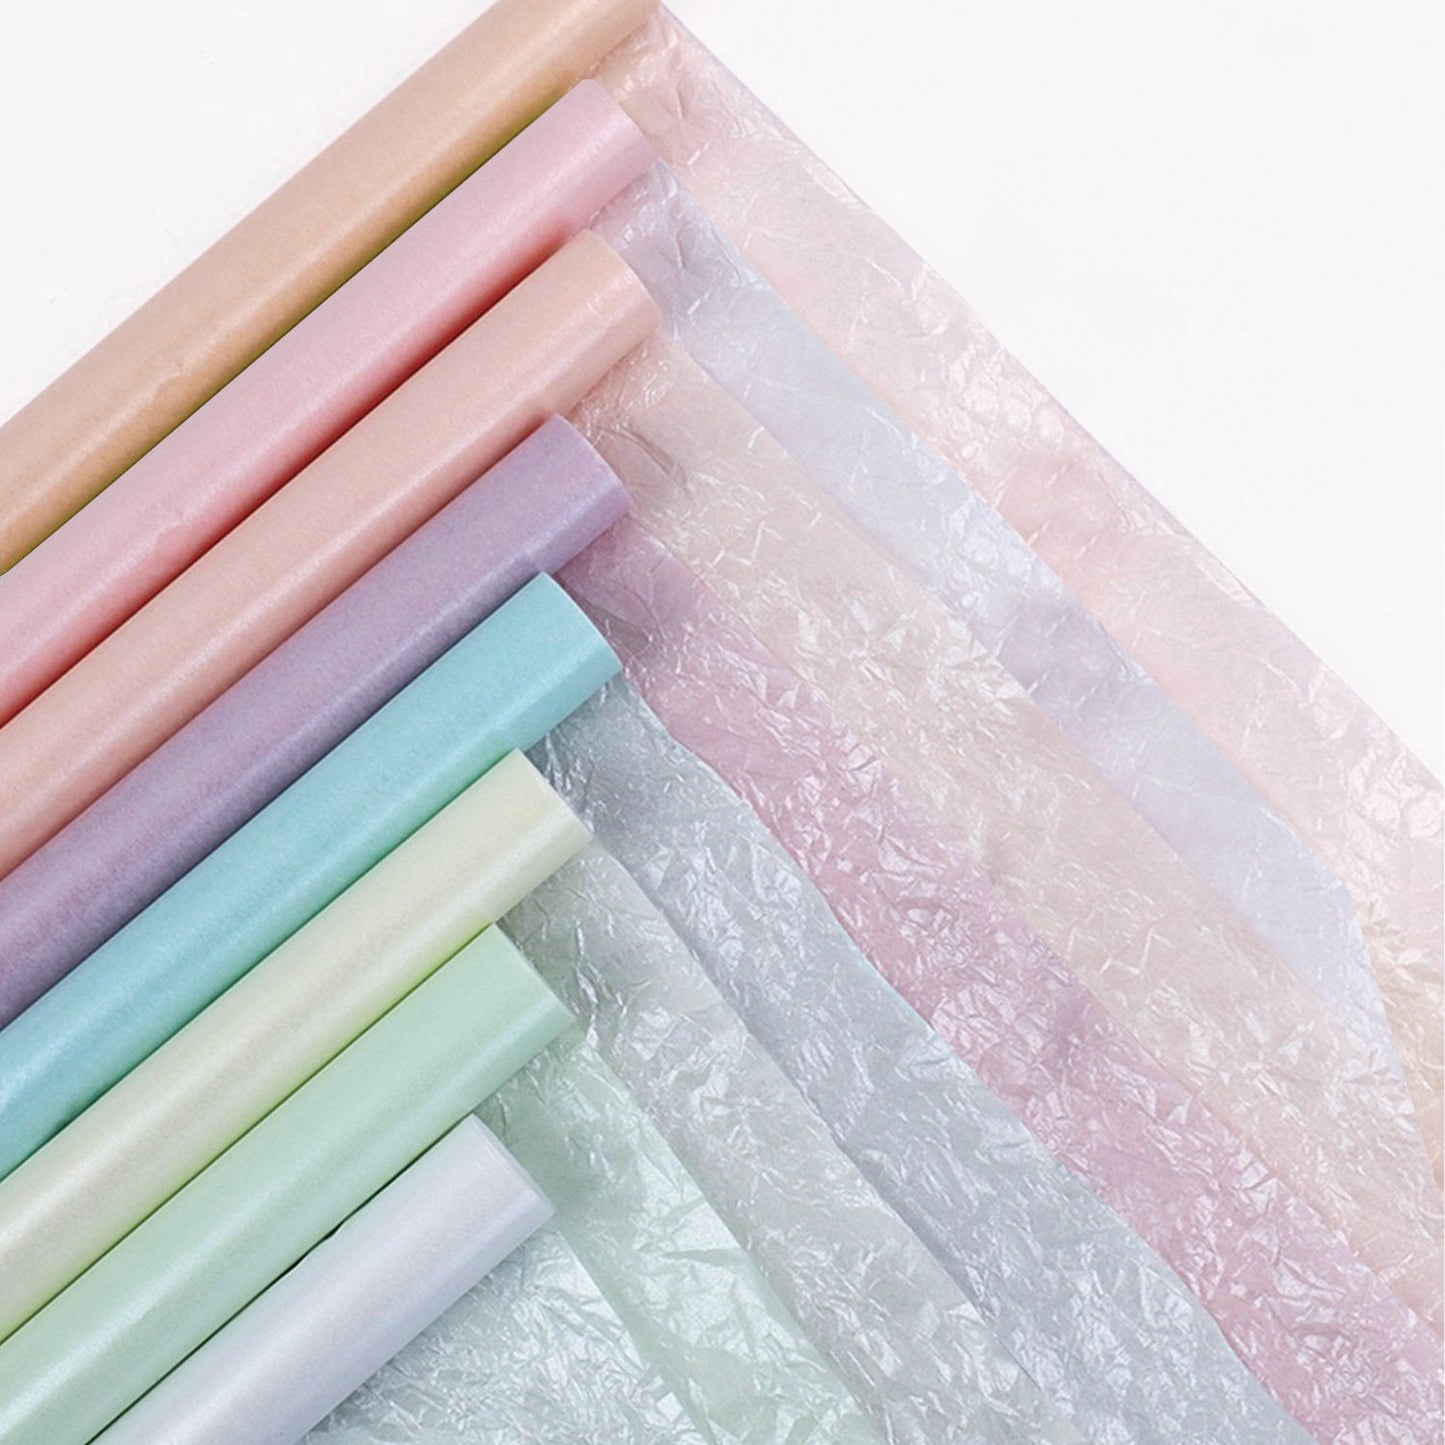 100sheets Light Purple 19.7x27.6 inches Pearlized Tissue Paper; $0.40/pc